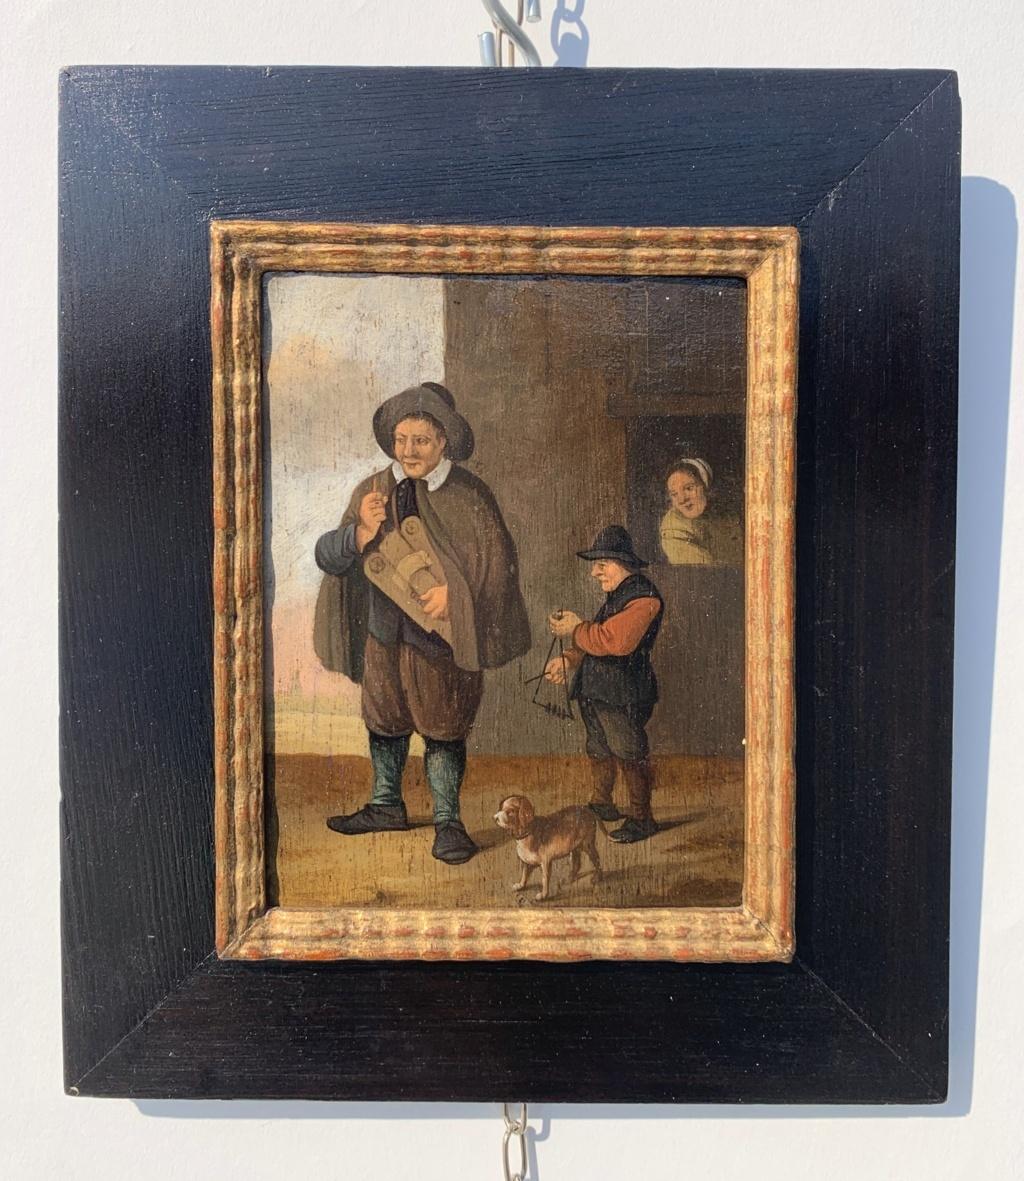 Pair of 17th-18th century Dutch paintings - Dogs figures - Oil on panel 5